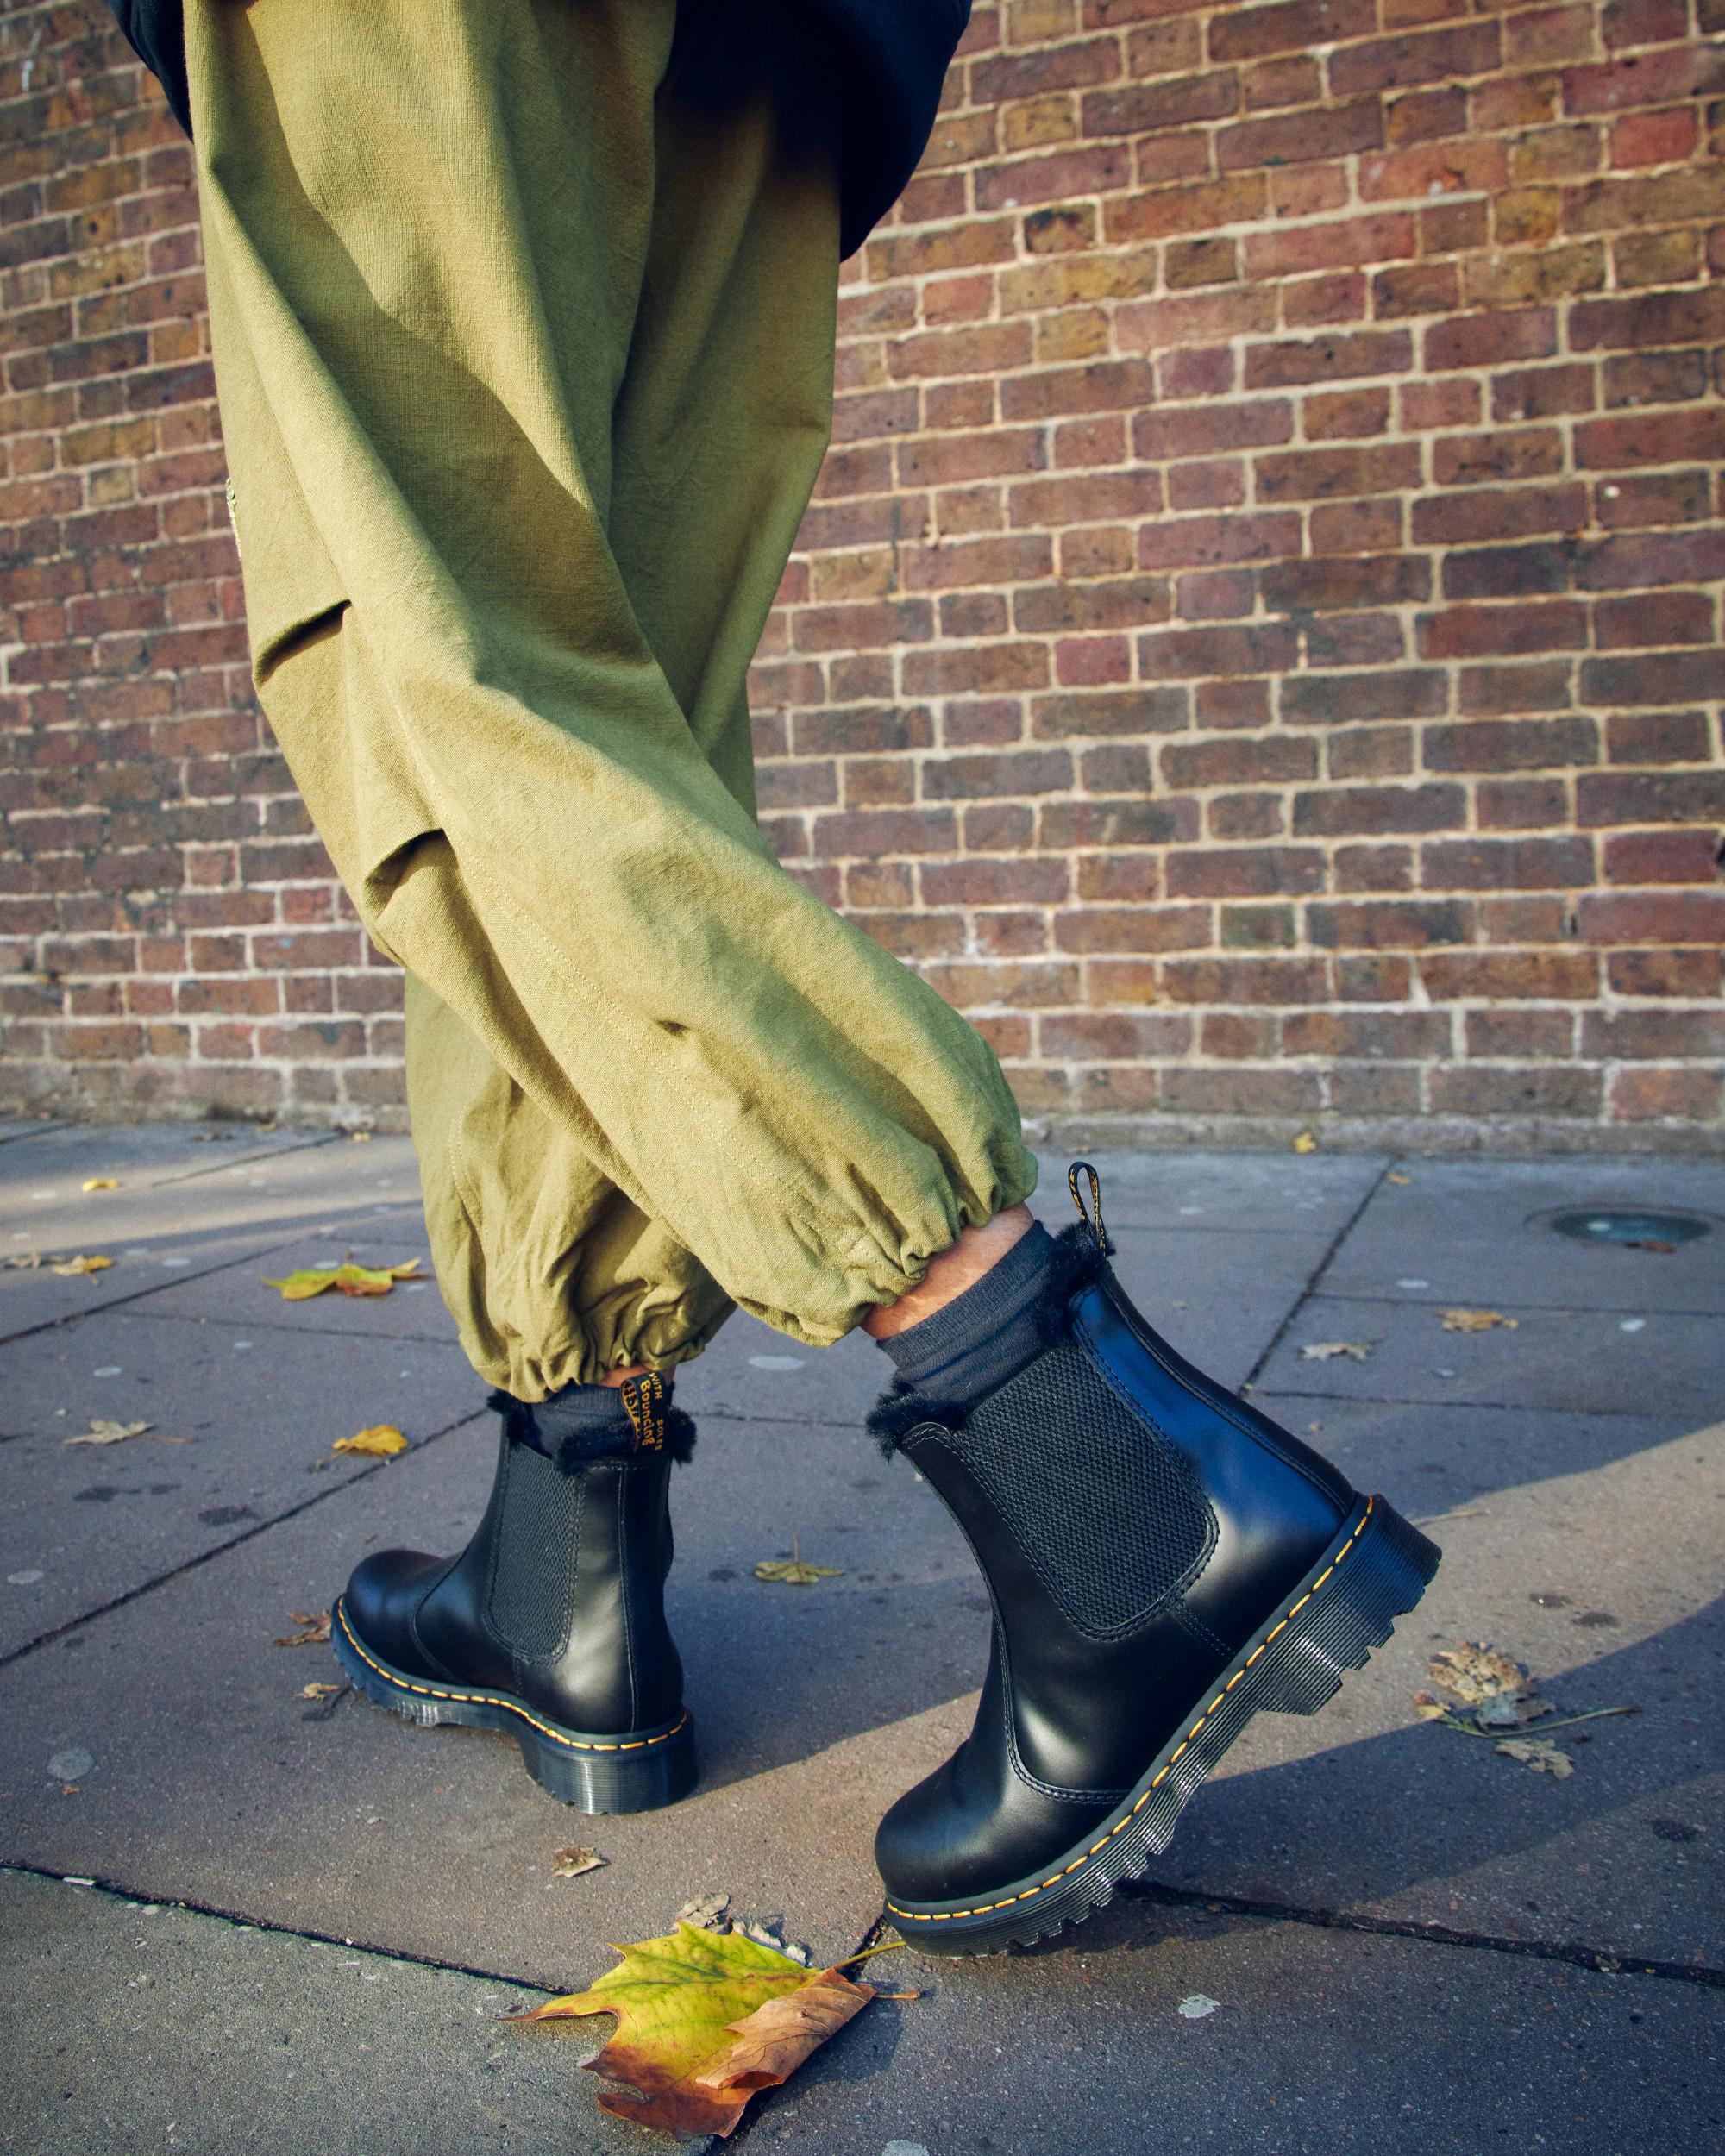 dr martens chelsea boots with fur